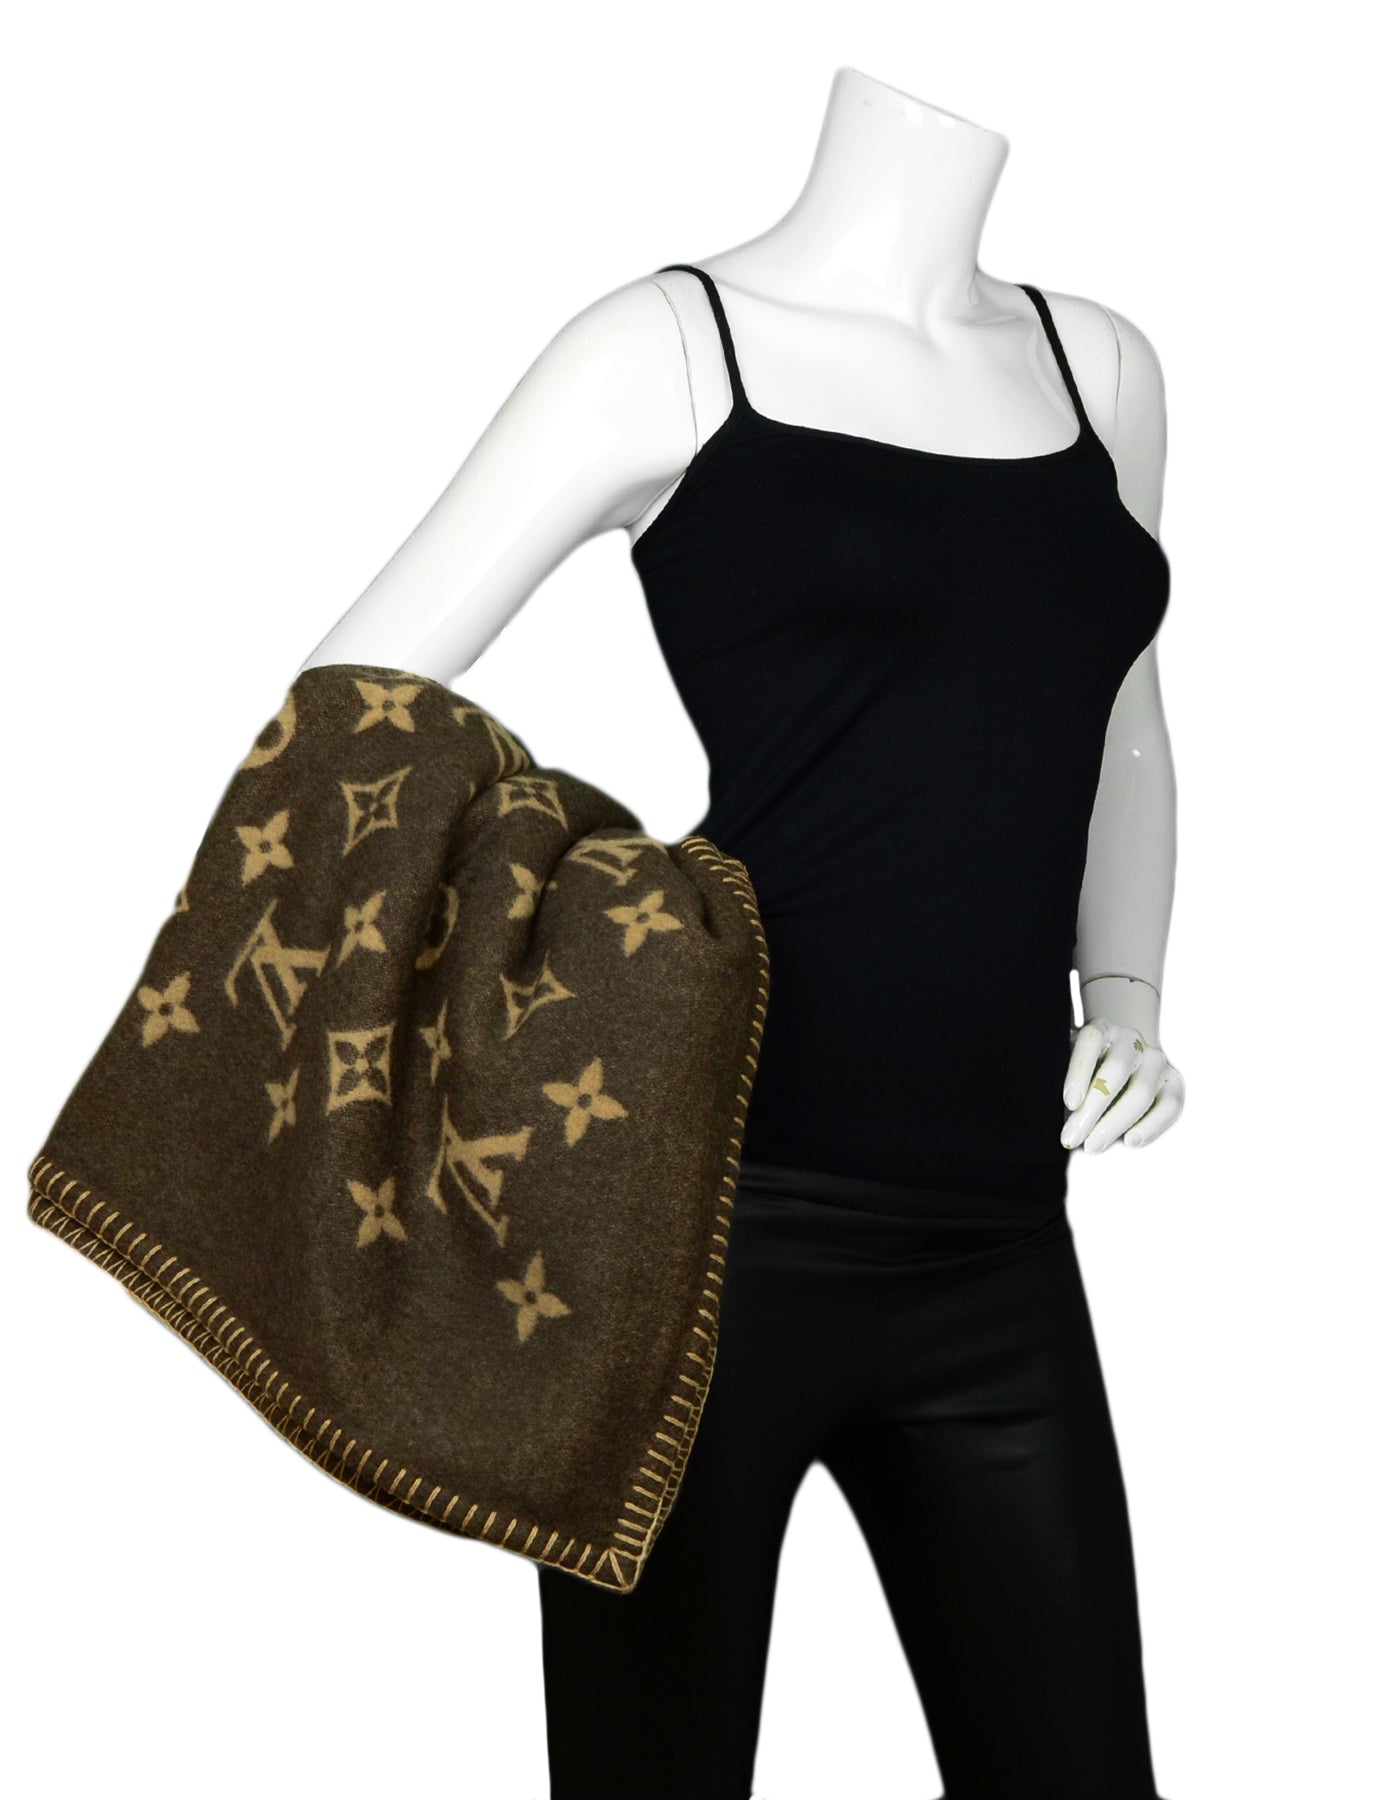 Louis Vuitton Brown Neo Monogram Cashmere And Wool Blanket